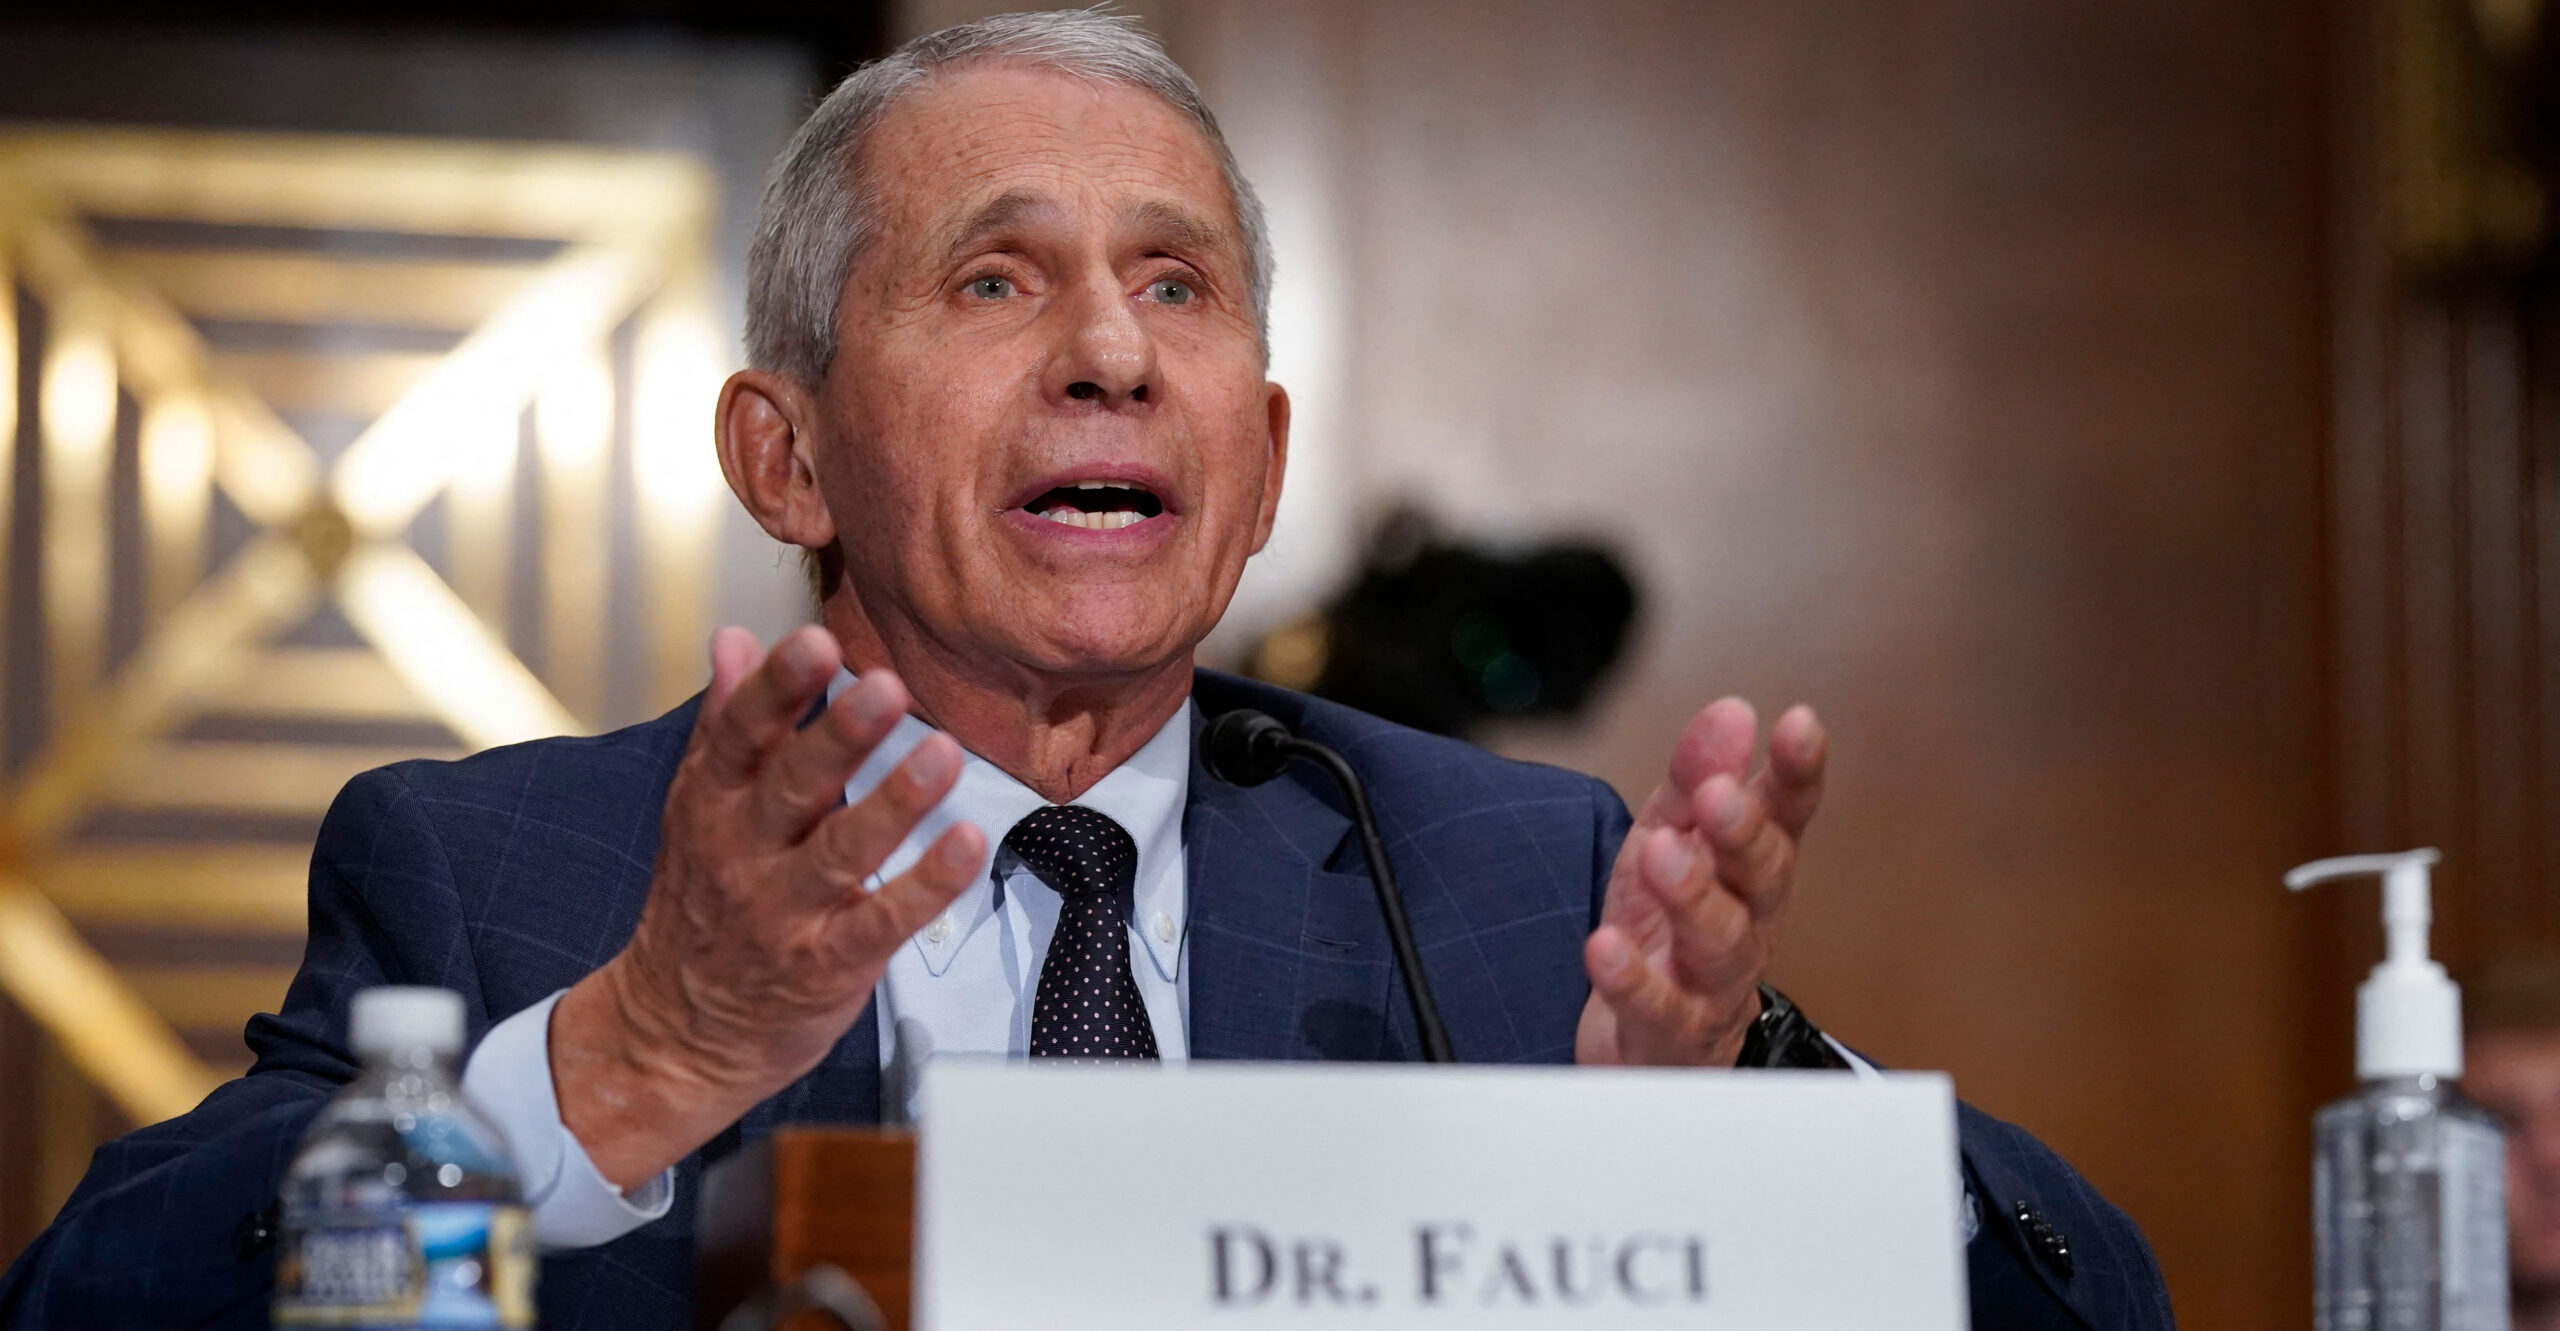 Documents Indicate Fauci ‘Untruthful’ About Coronavirus Research in China, Disease Expert Says